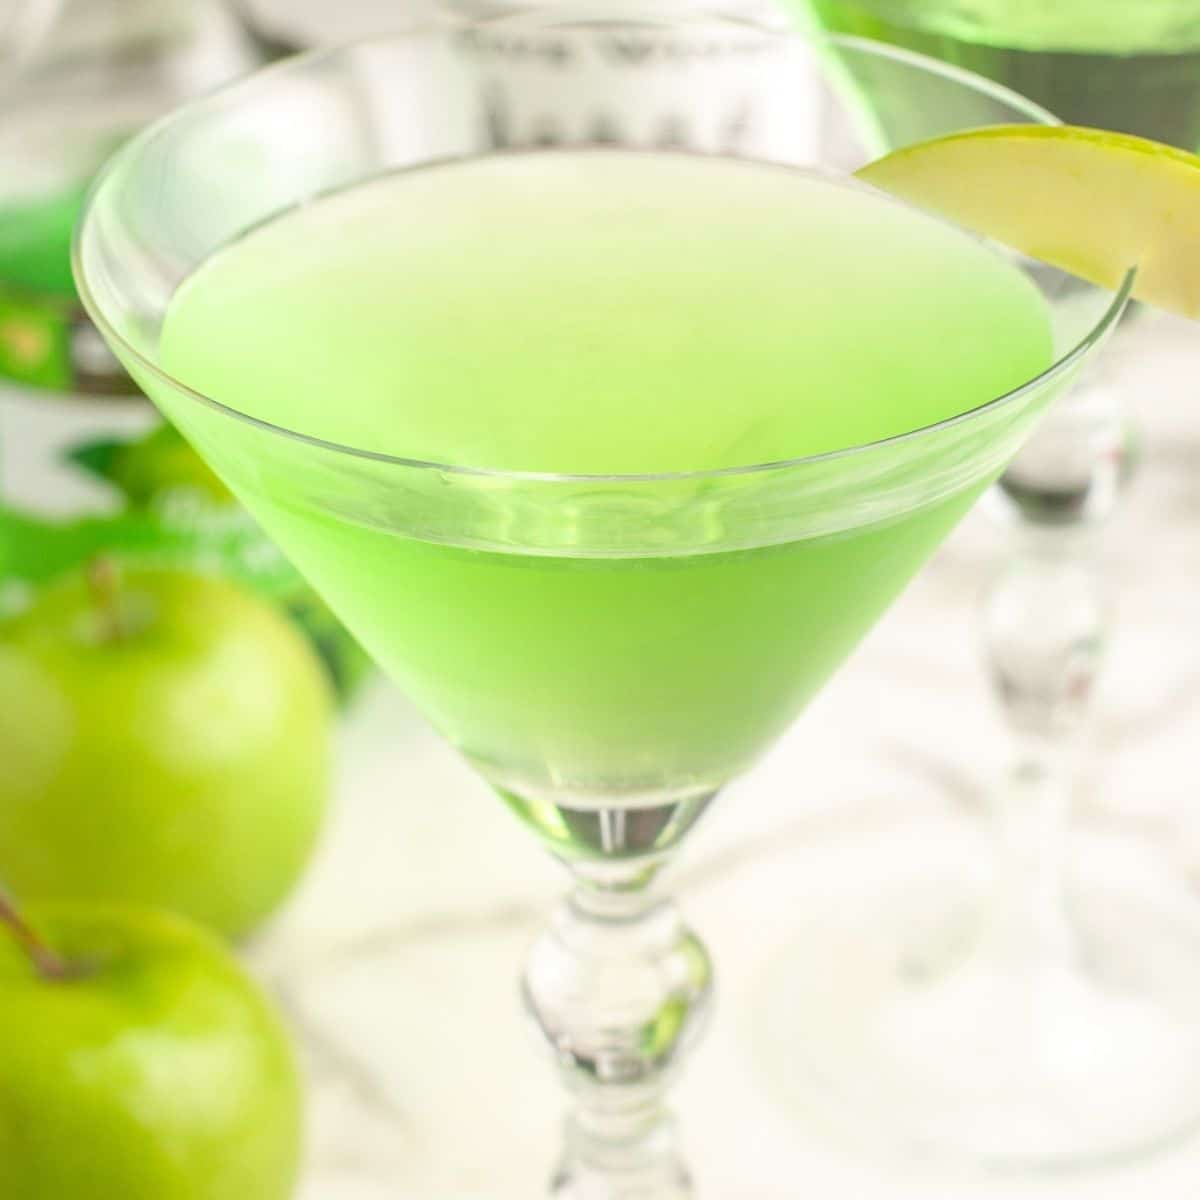 Green apple martini made with fresh granny smith apples!